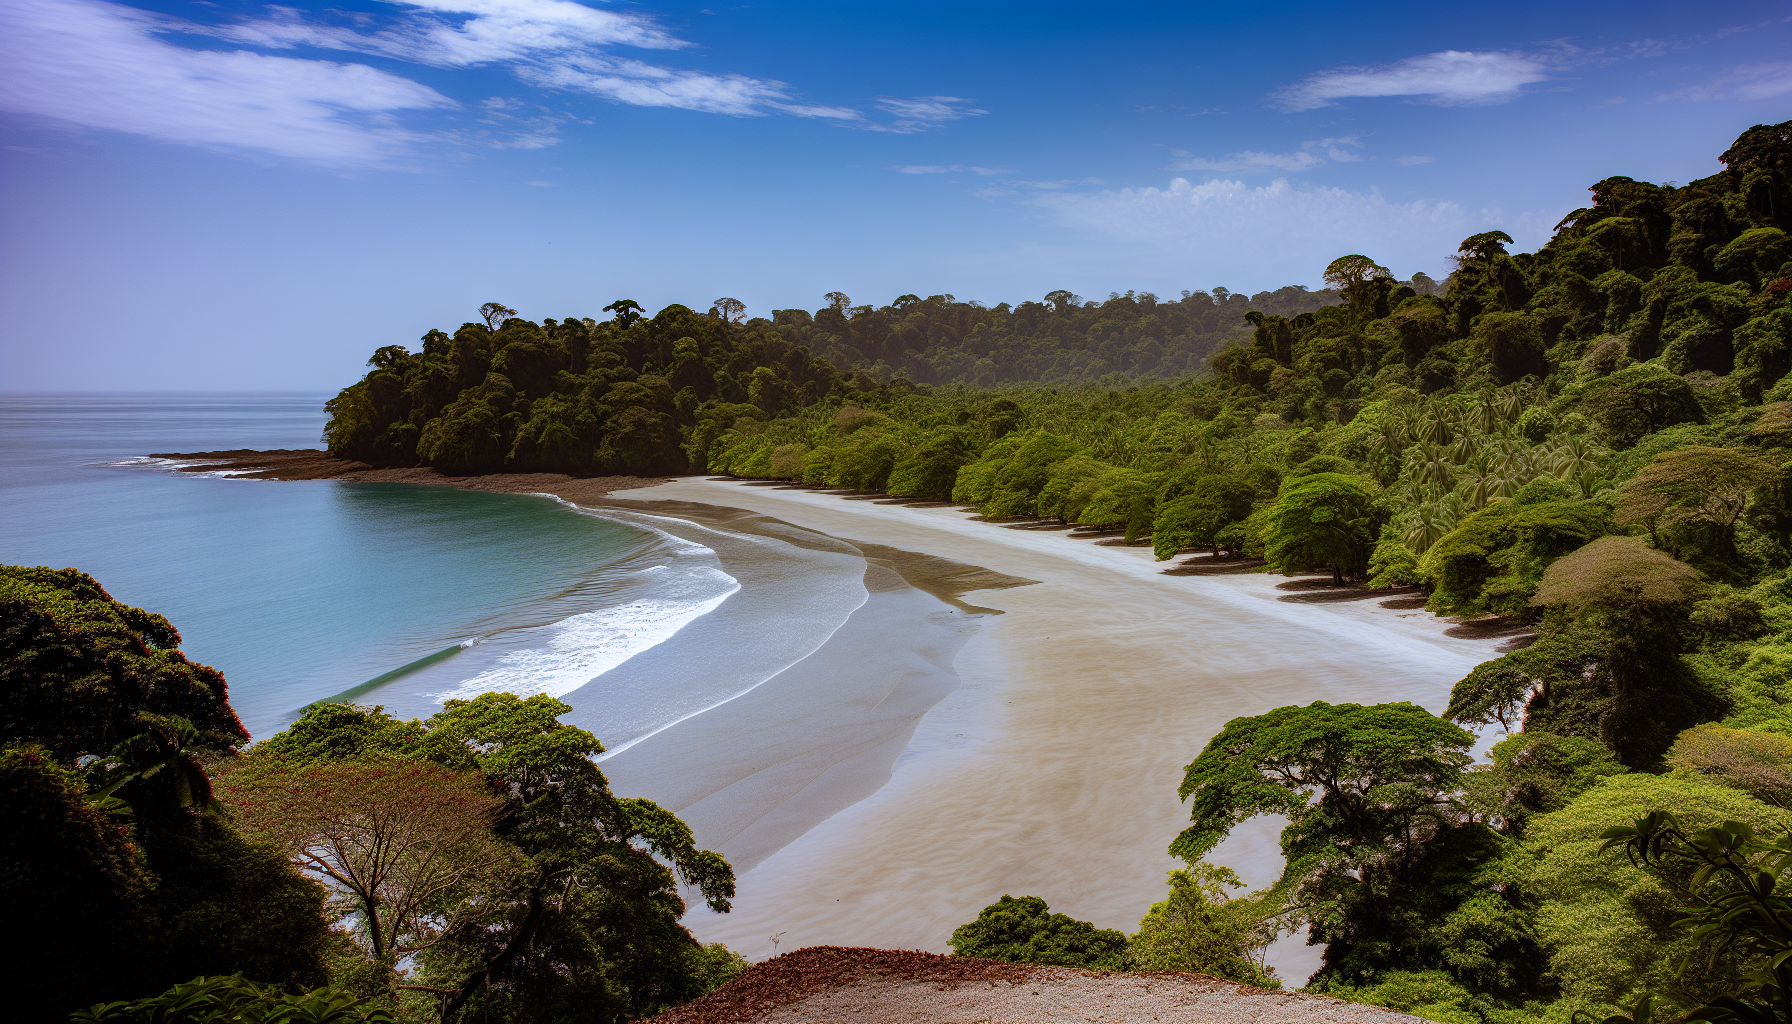 Pristine beach surrounded by dense rainforest in Manuel Antonio National Park